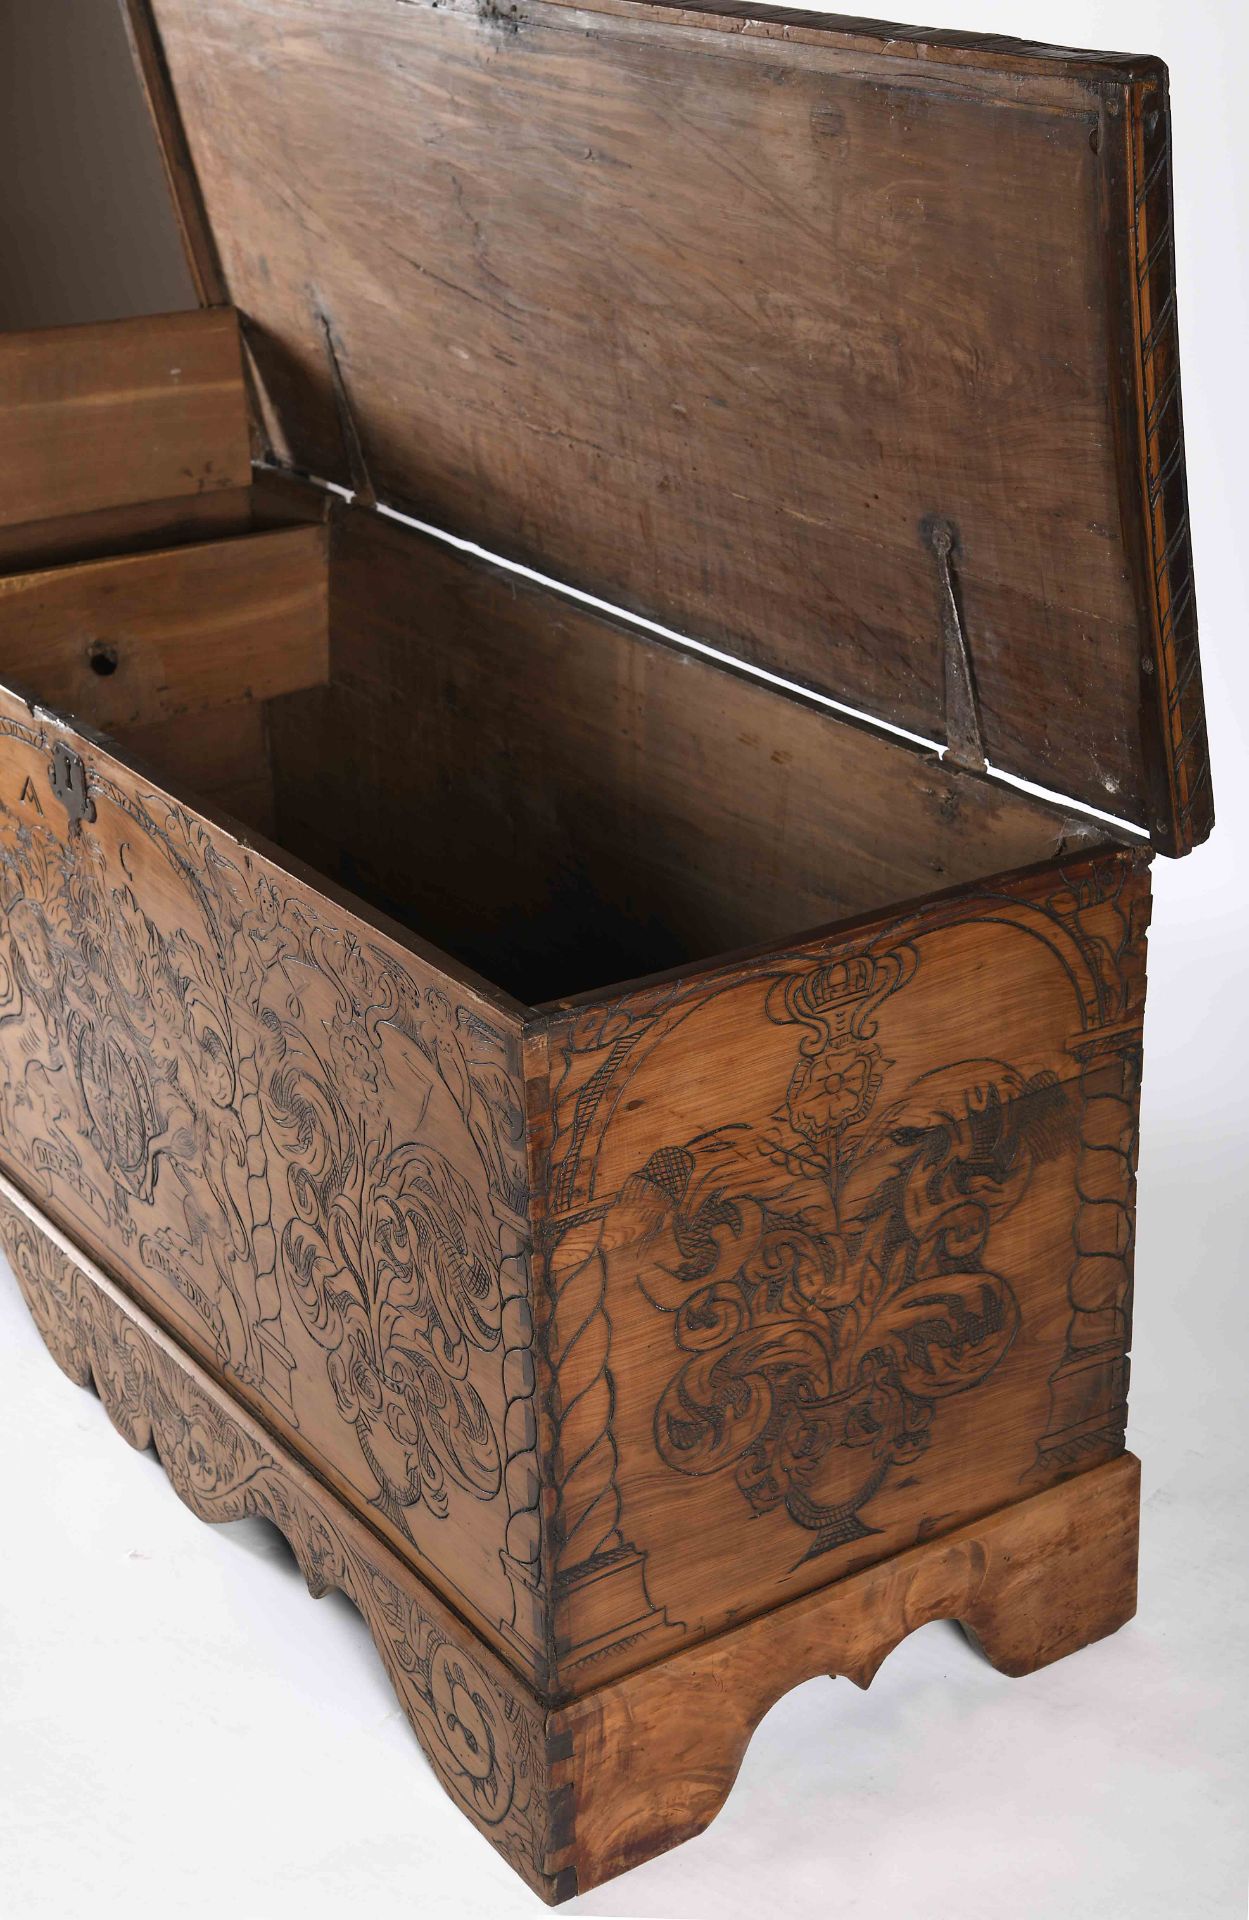 A grooved decoration large chest with solles - 1687 - Image 4 of 4